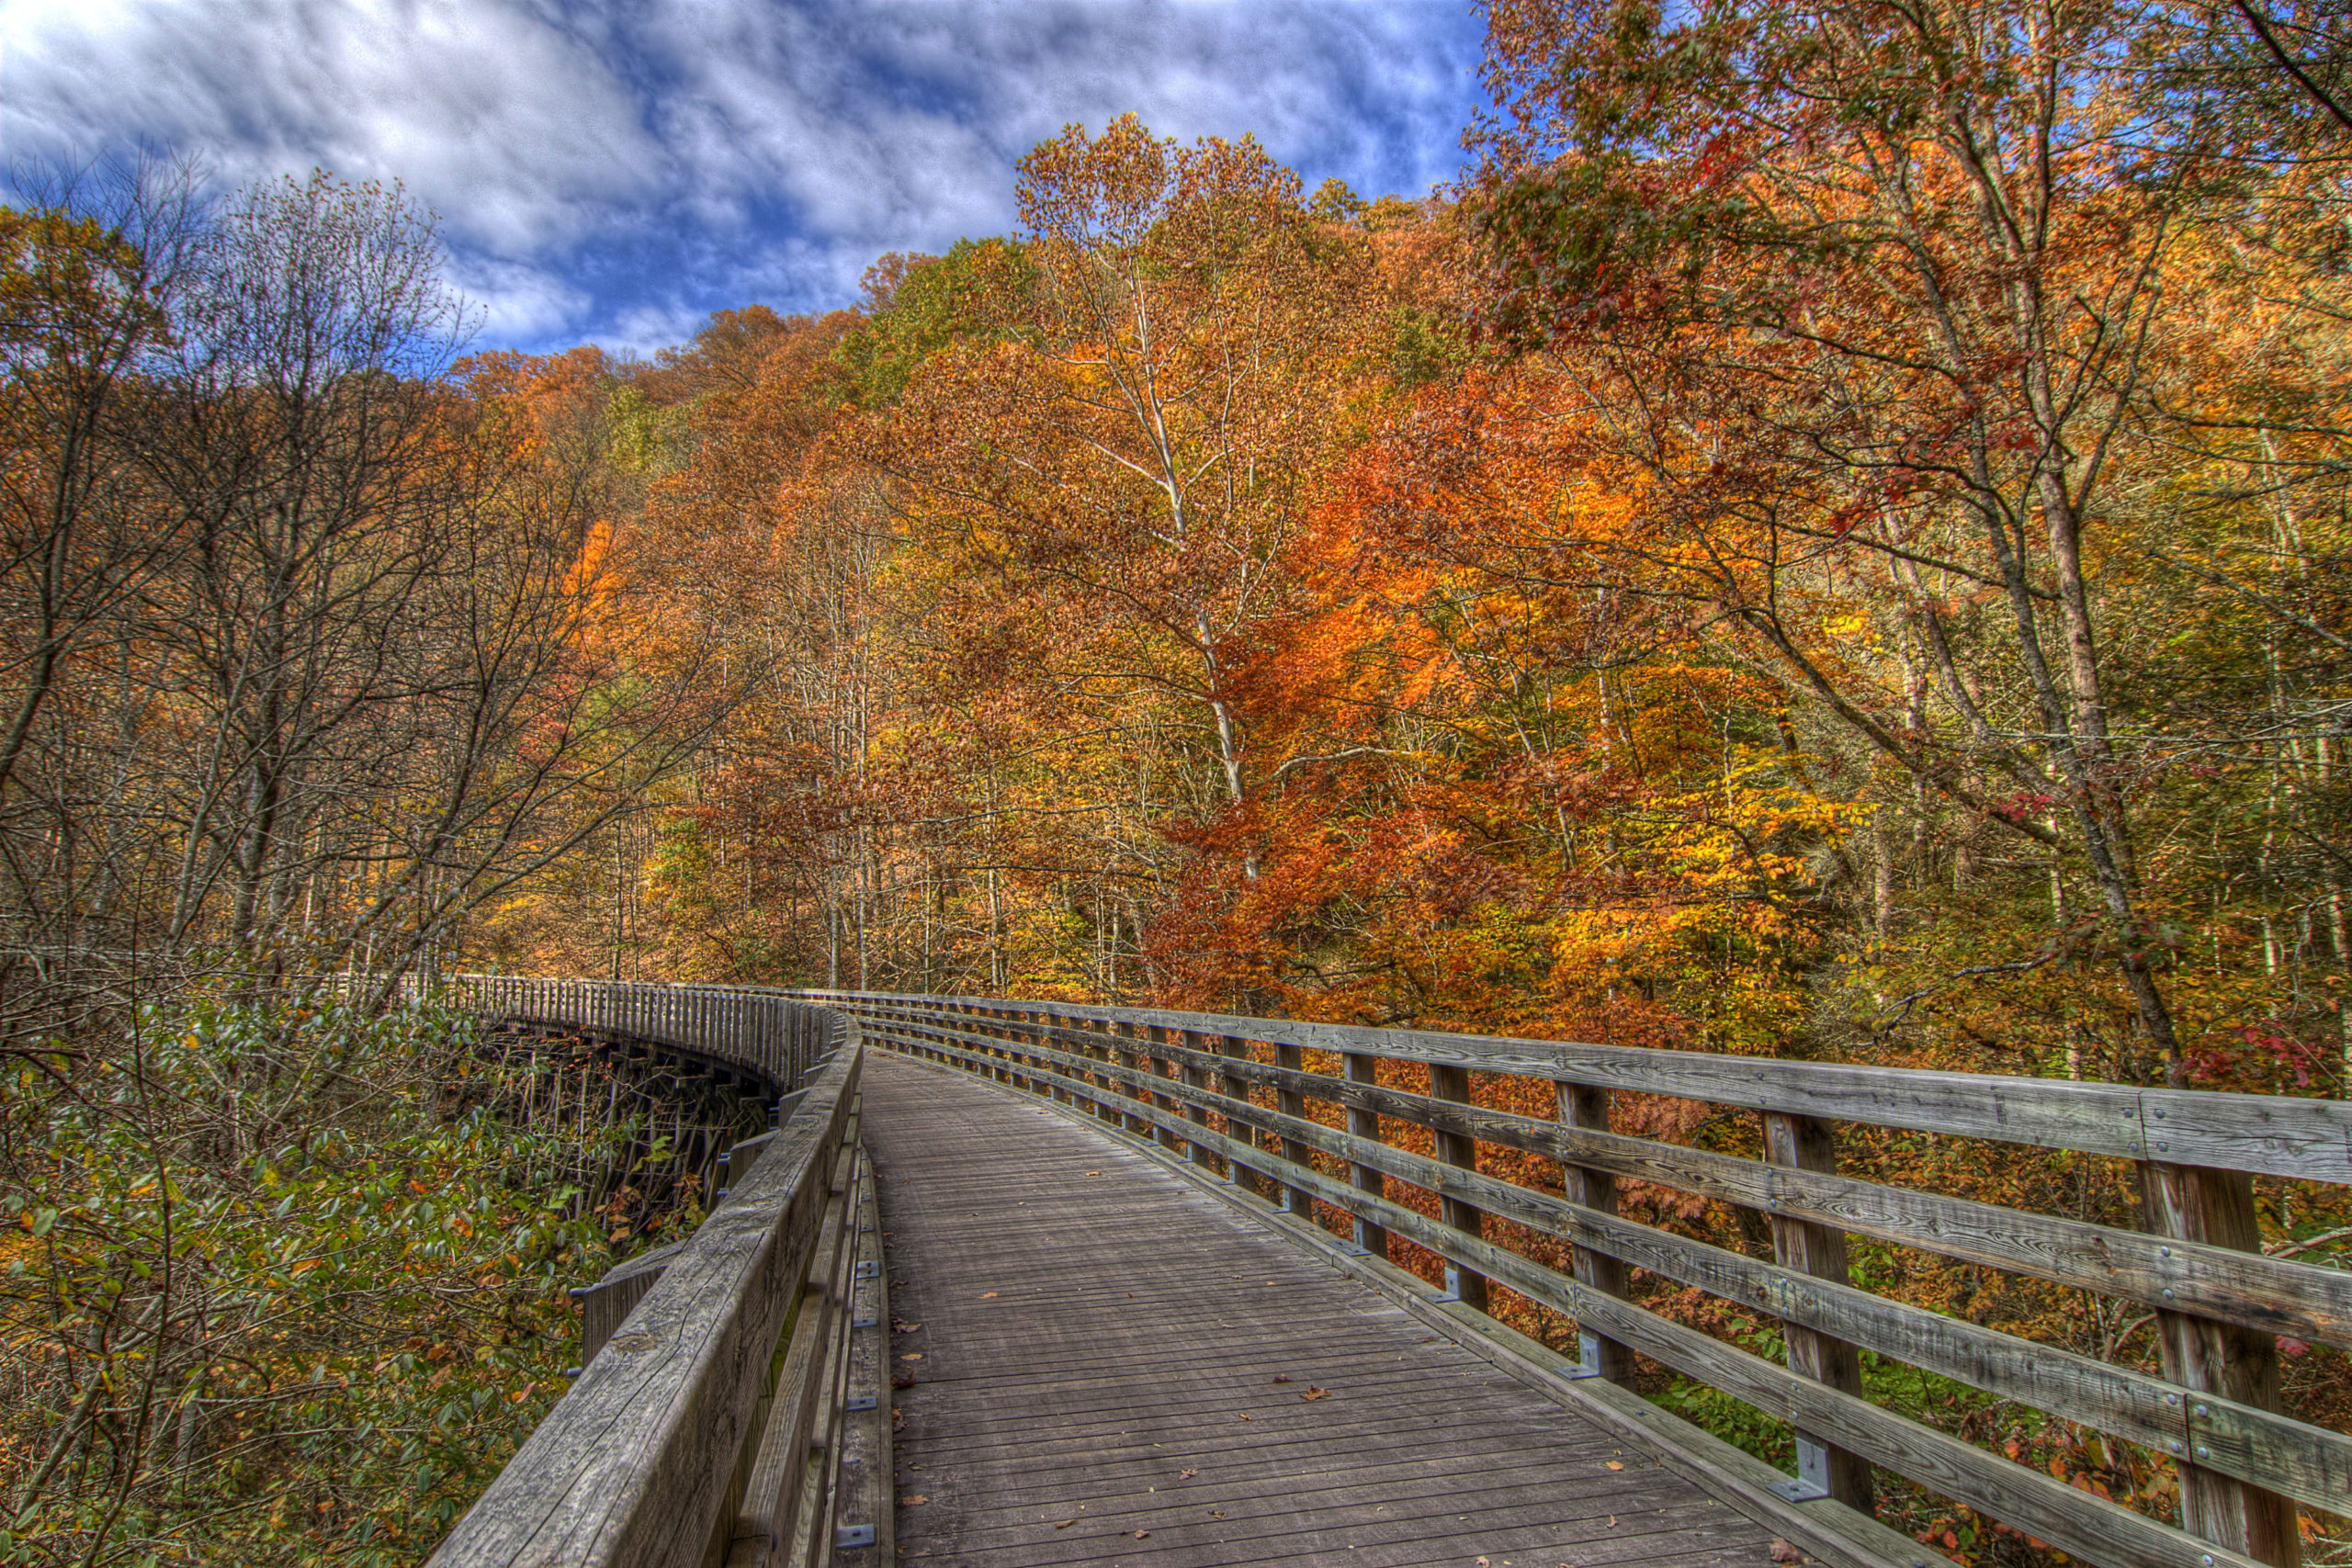 Best things to do in Abingdon, Virginia - The Virginia Creeper Trail